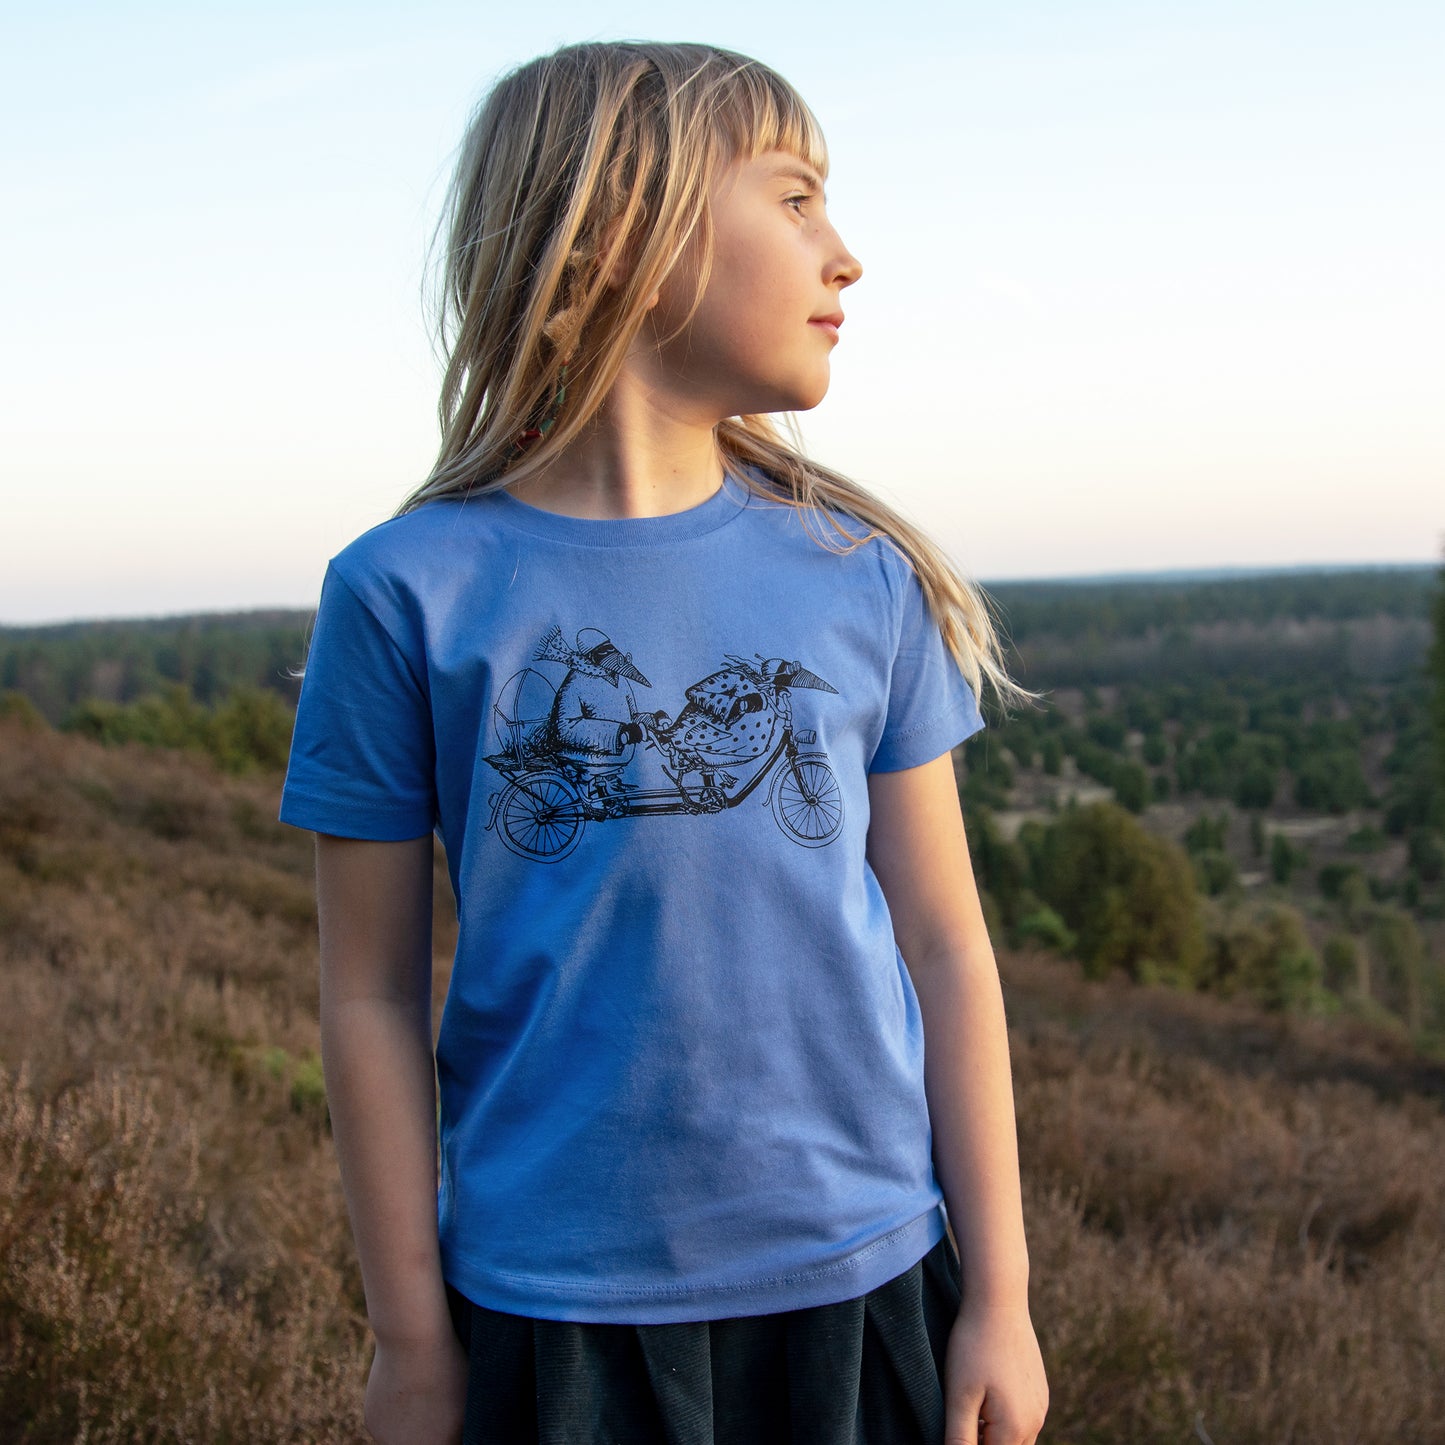 Tandem T-Shirt in bright blue